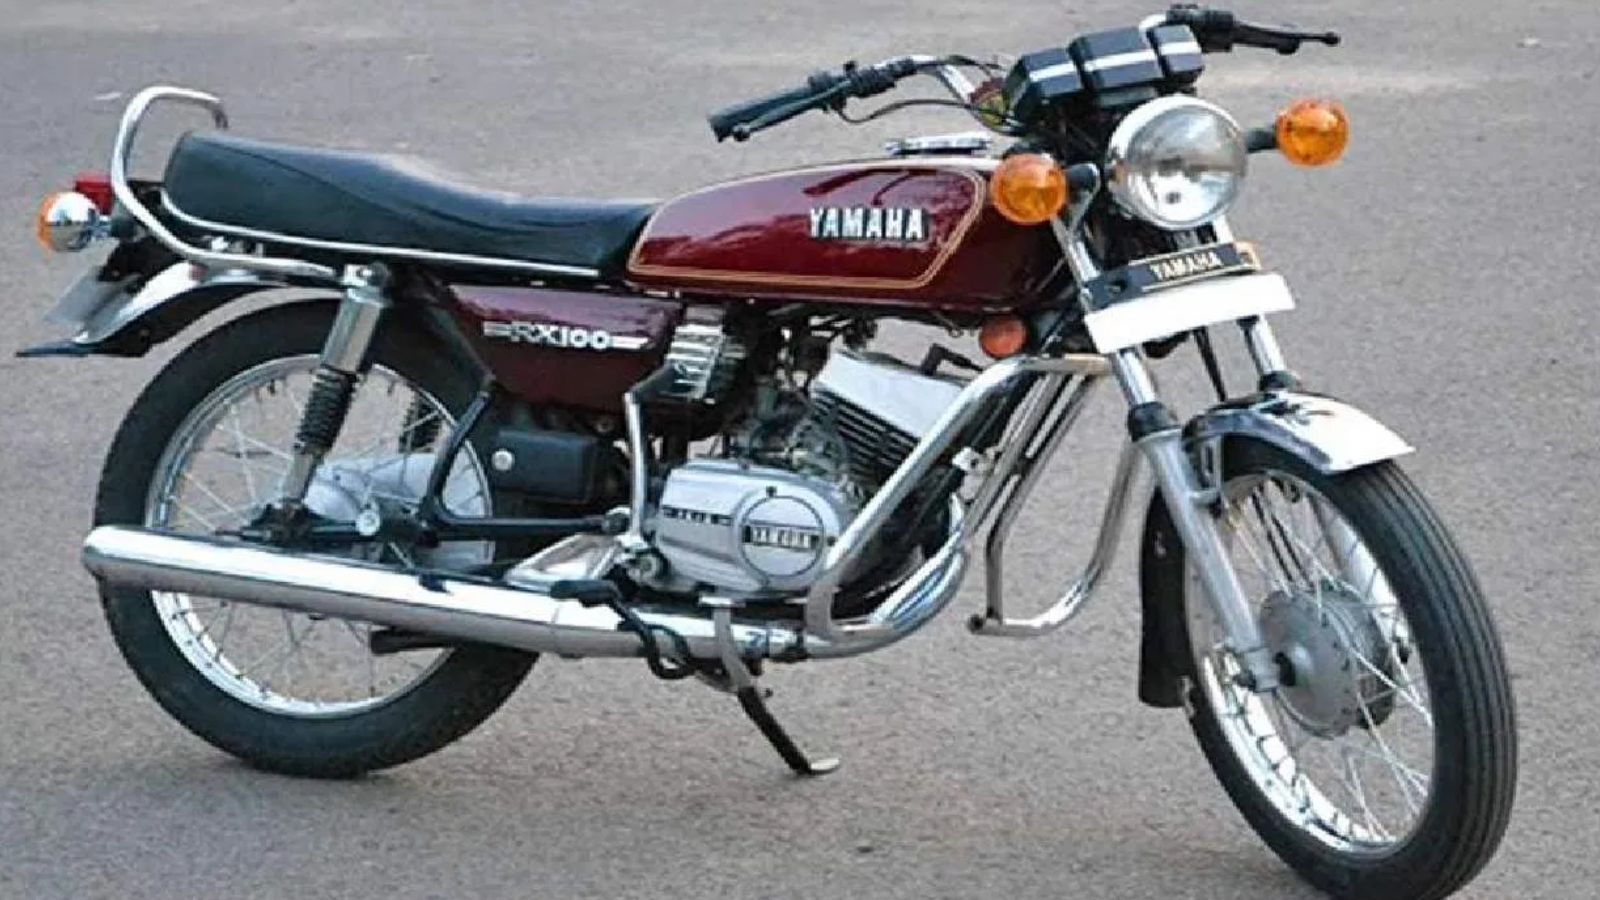 Yamaha RX100: A Legacy Revived? The Retro Bike Revs Up for a Potential Return